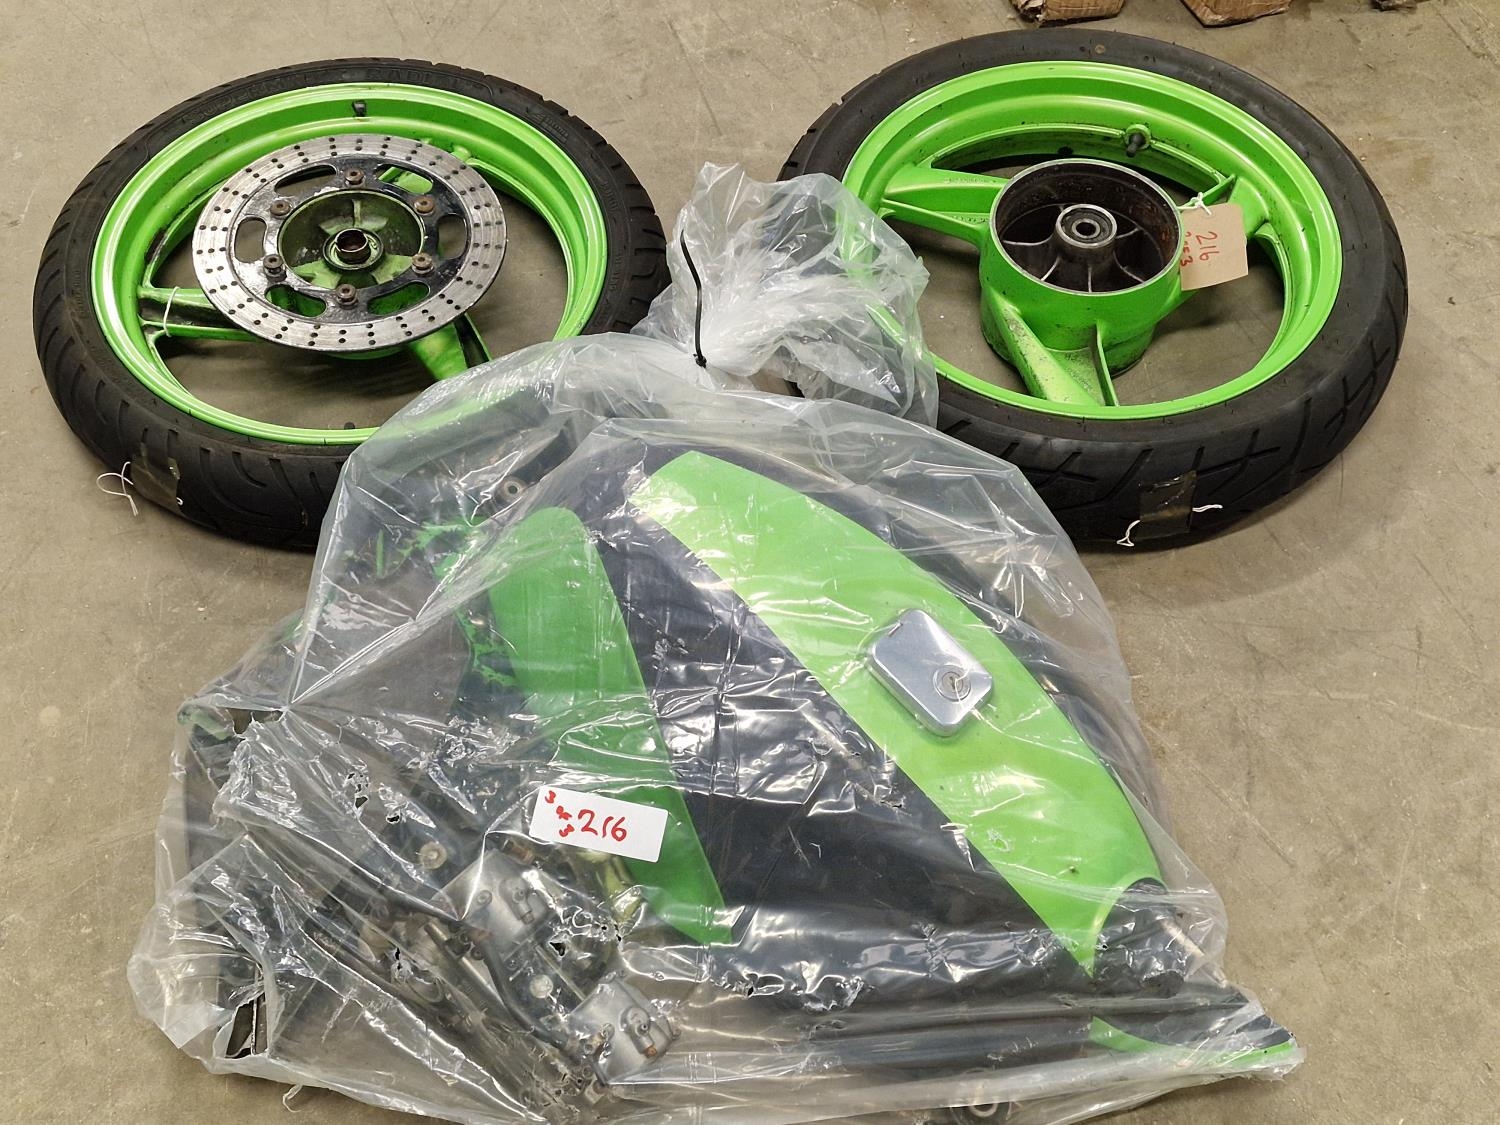 Two motorcycle wheels together with some spare parts (REF 216).